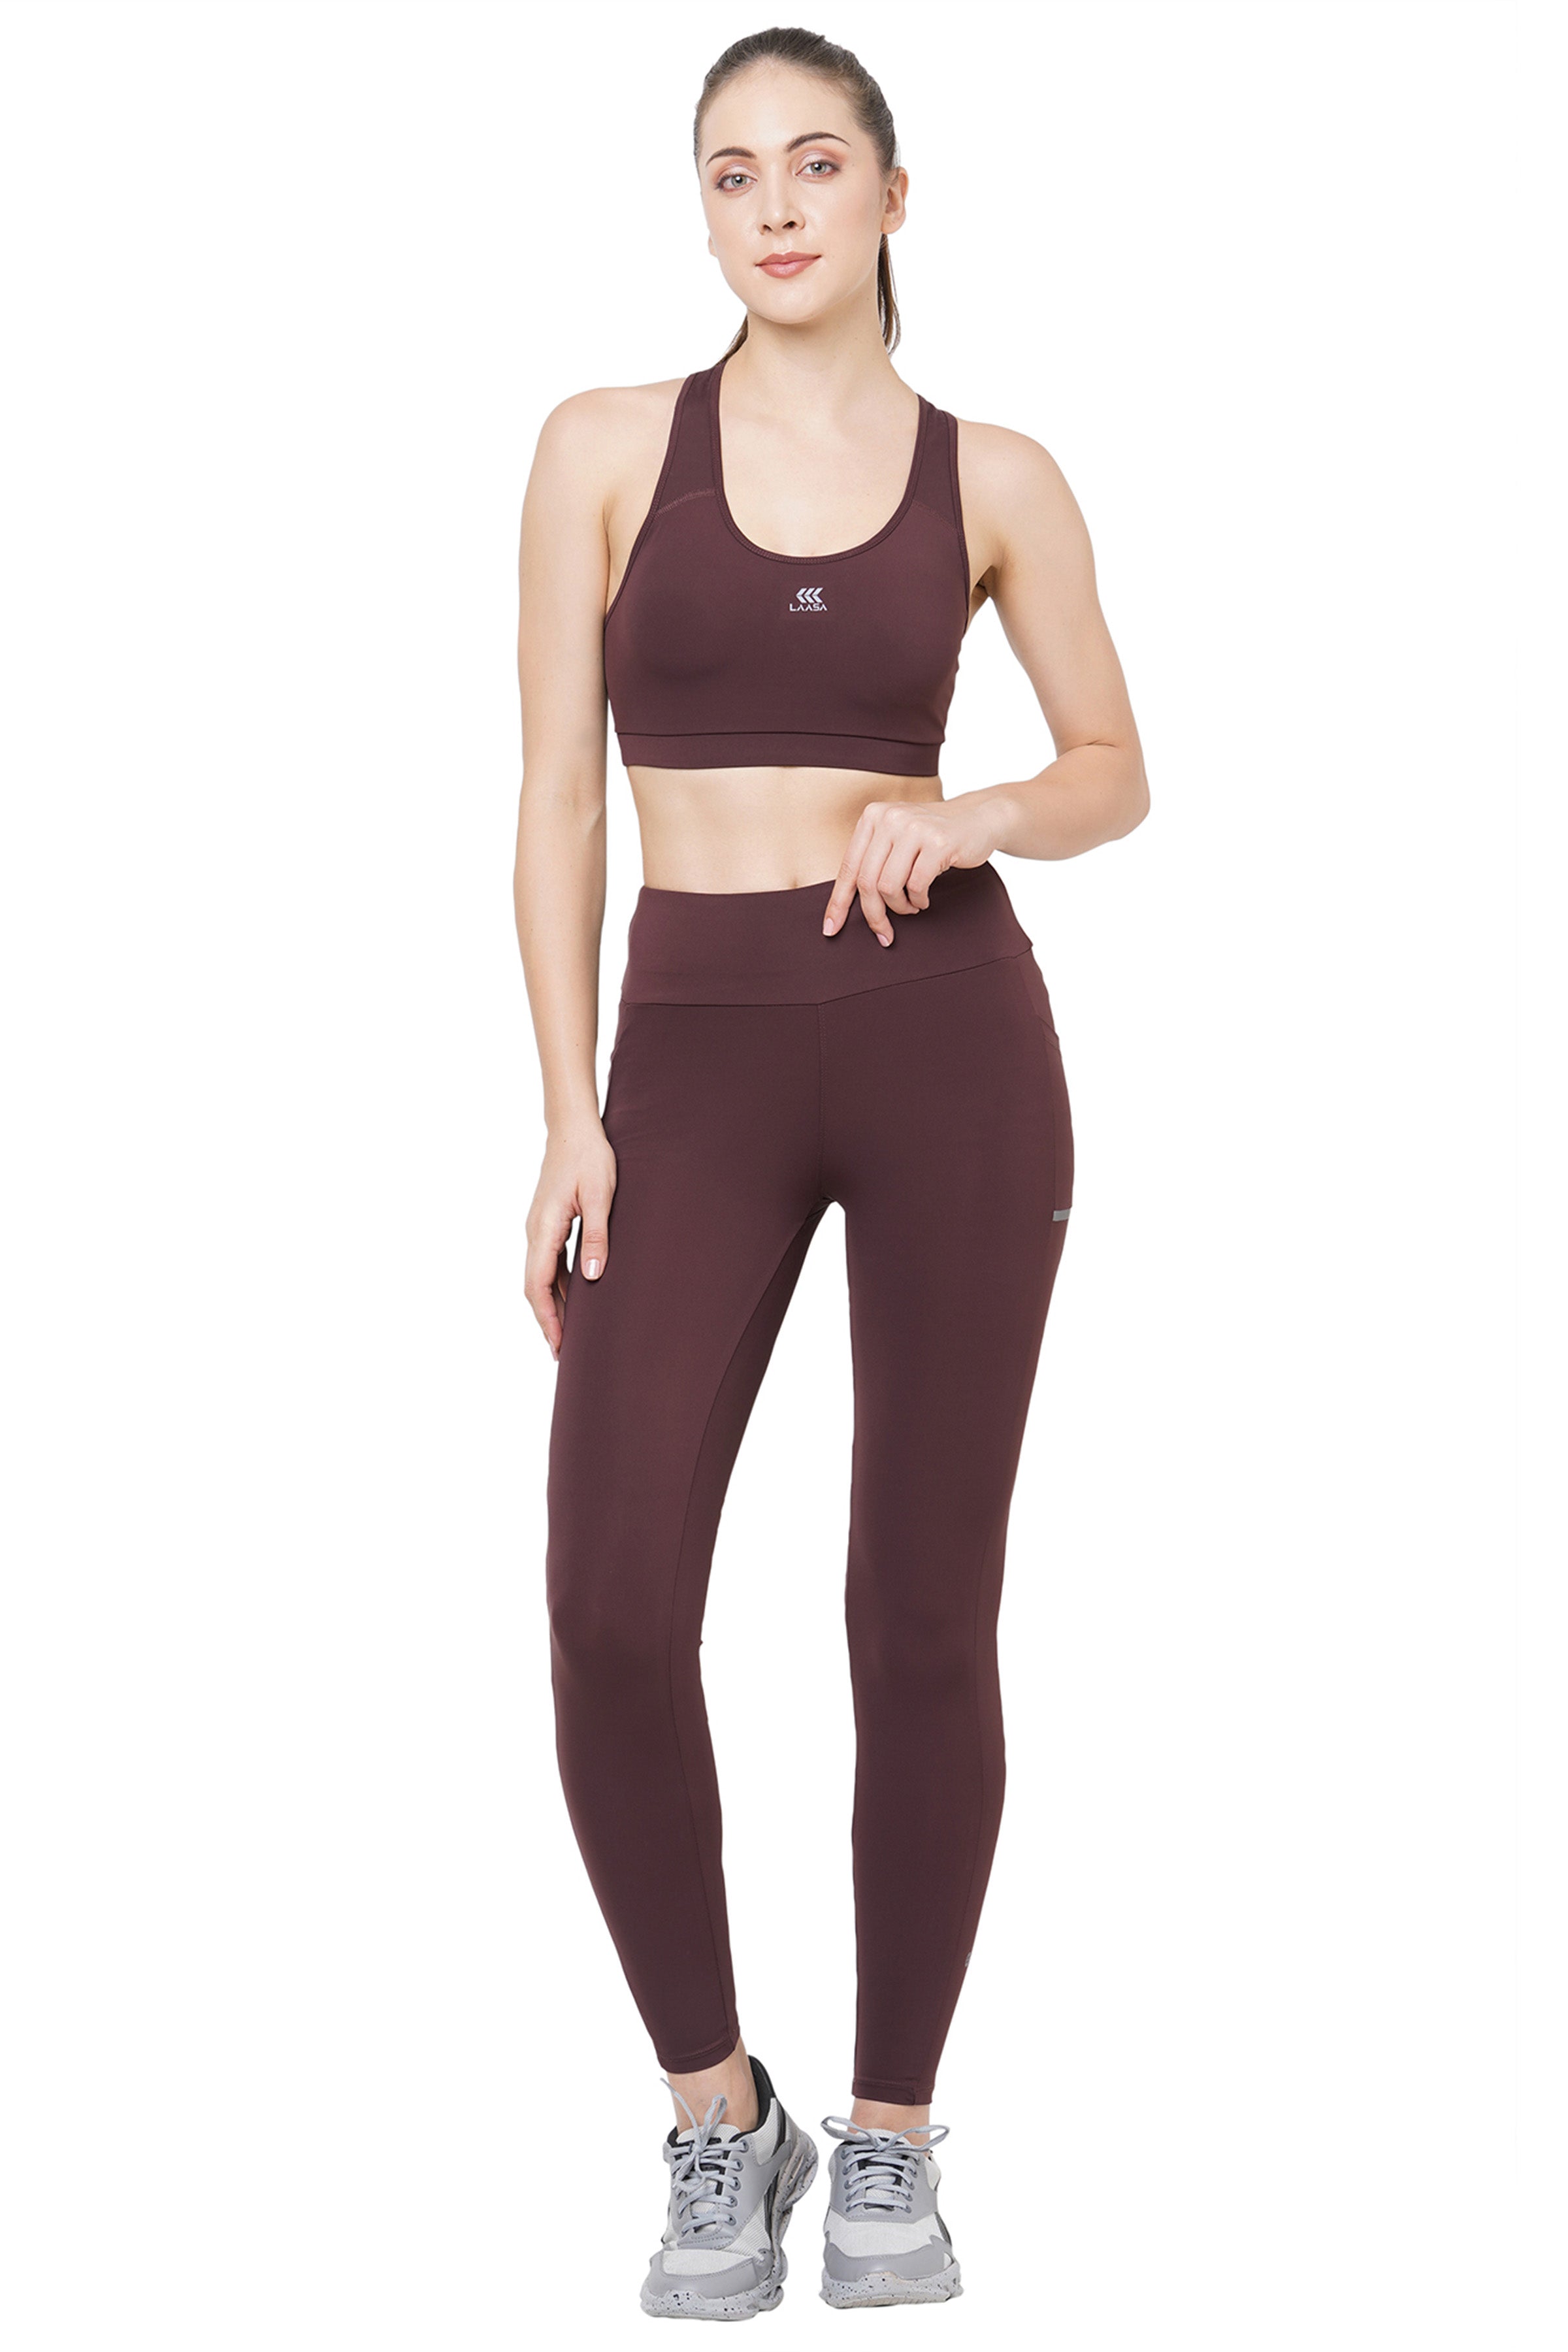 V3 Apparel Womens Tempo Seamless Scrunch Workout Leggings - Burgundy Red -  Gym, Running, Yoga Tights